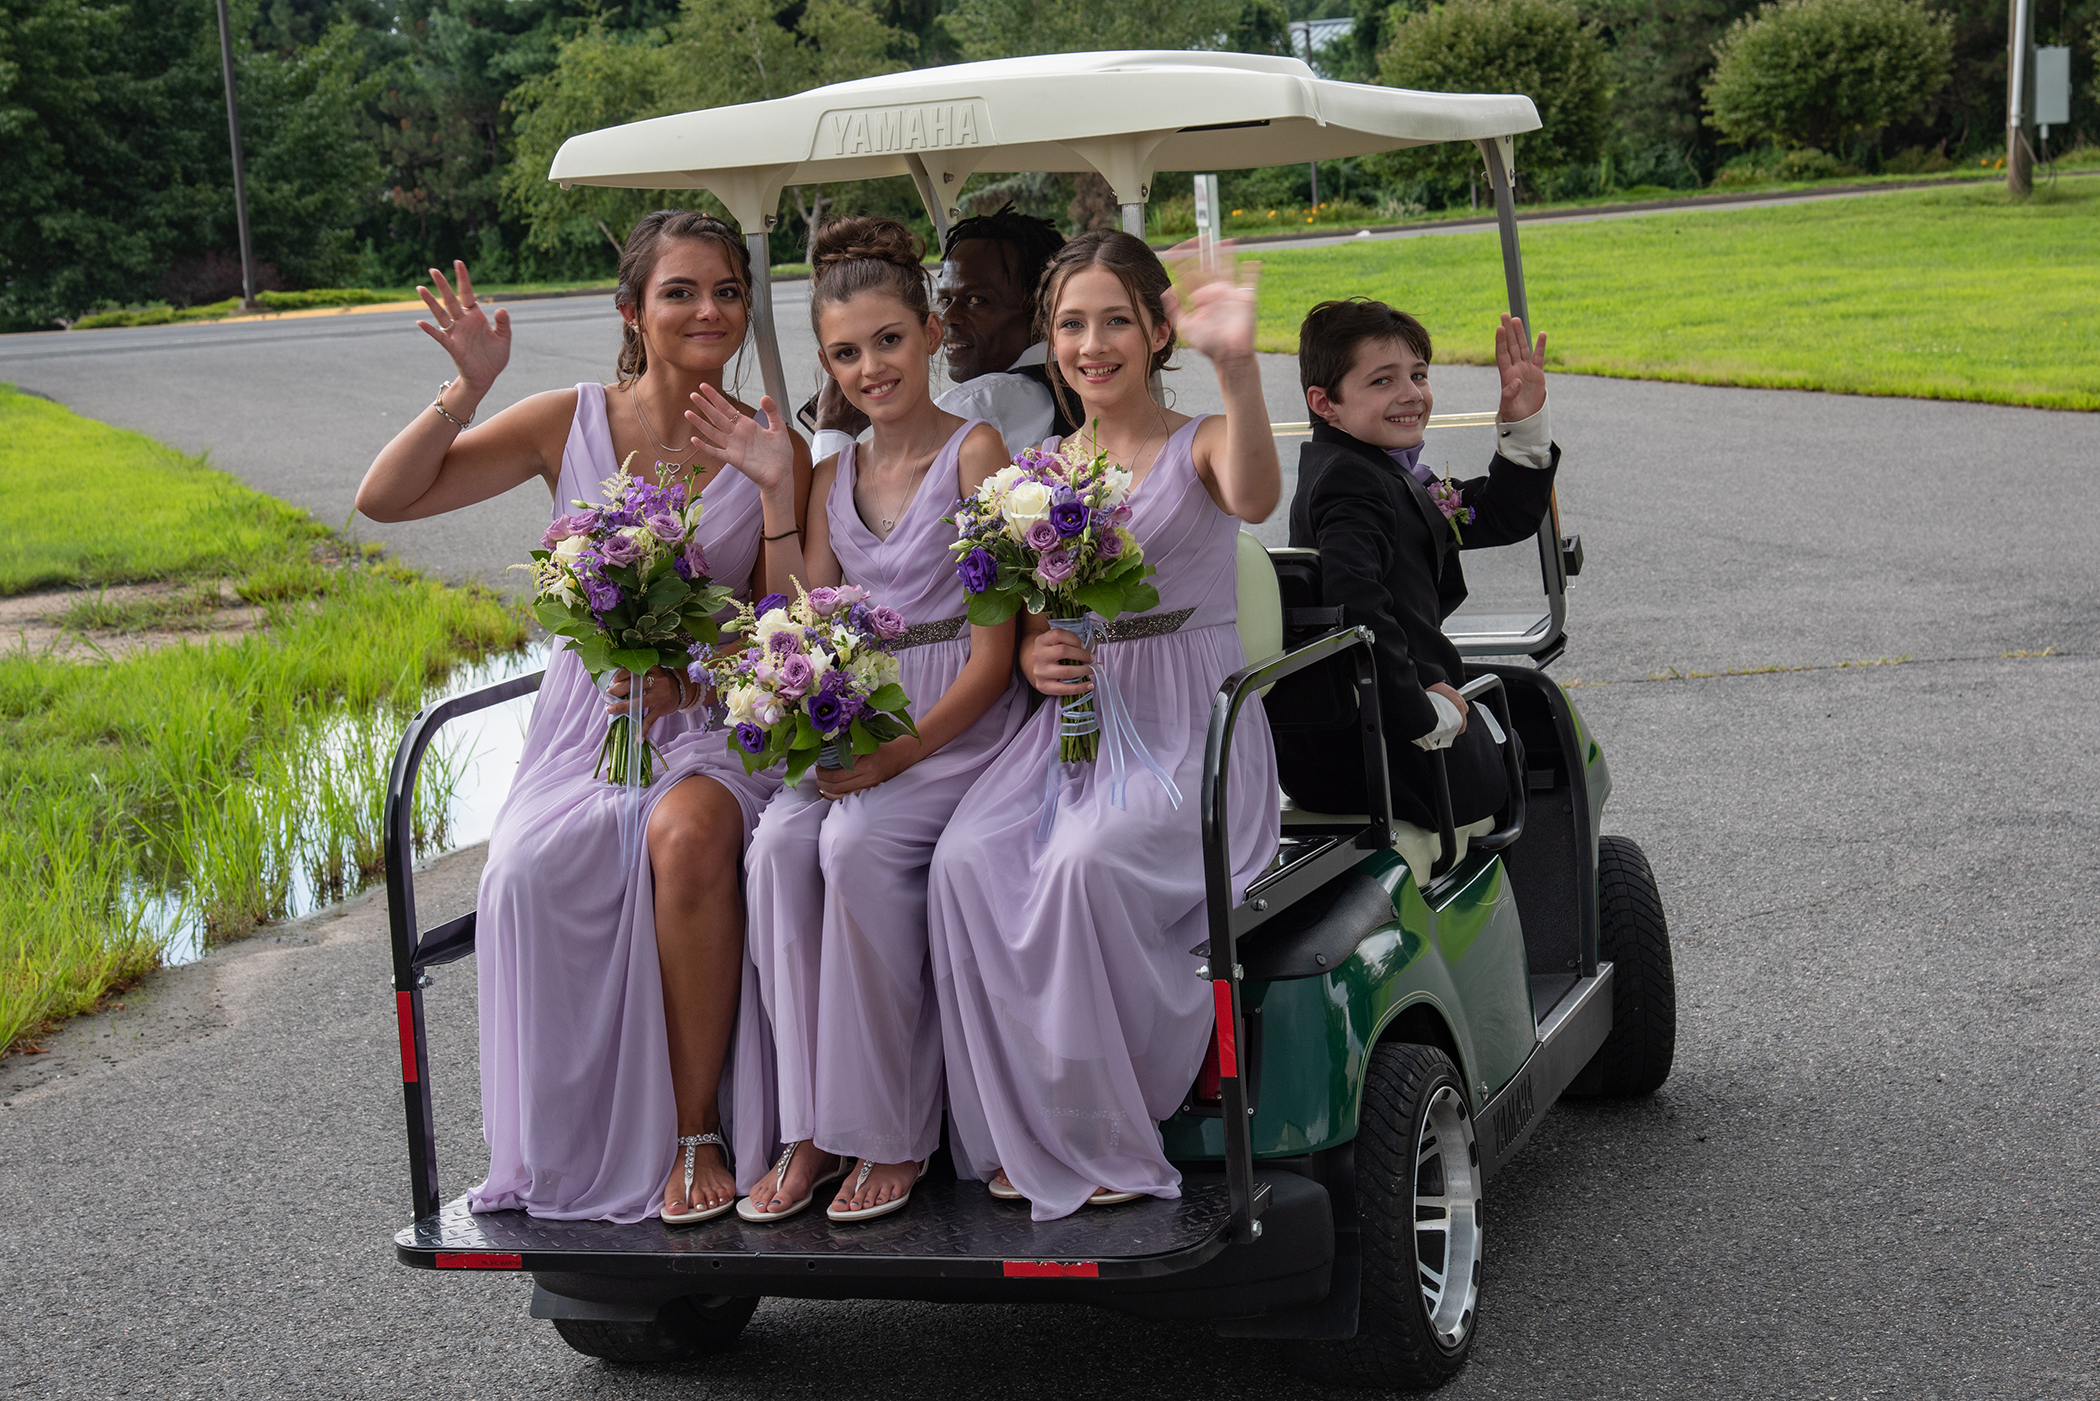 The Maneely's Banquets Golf Cart